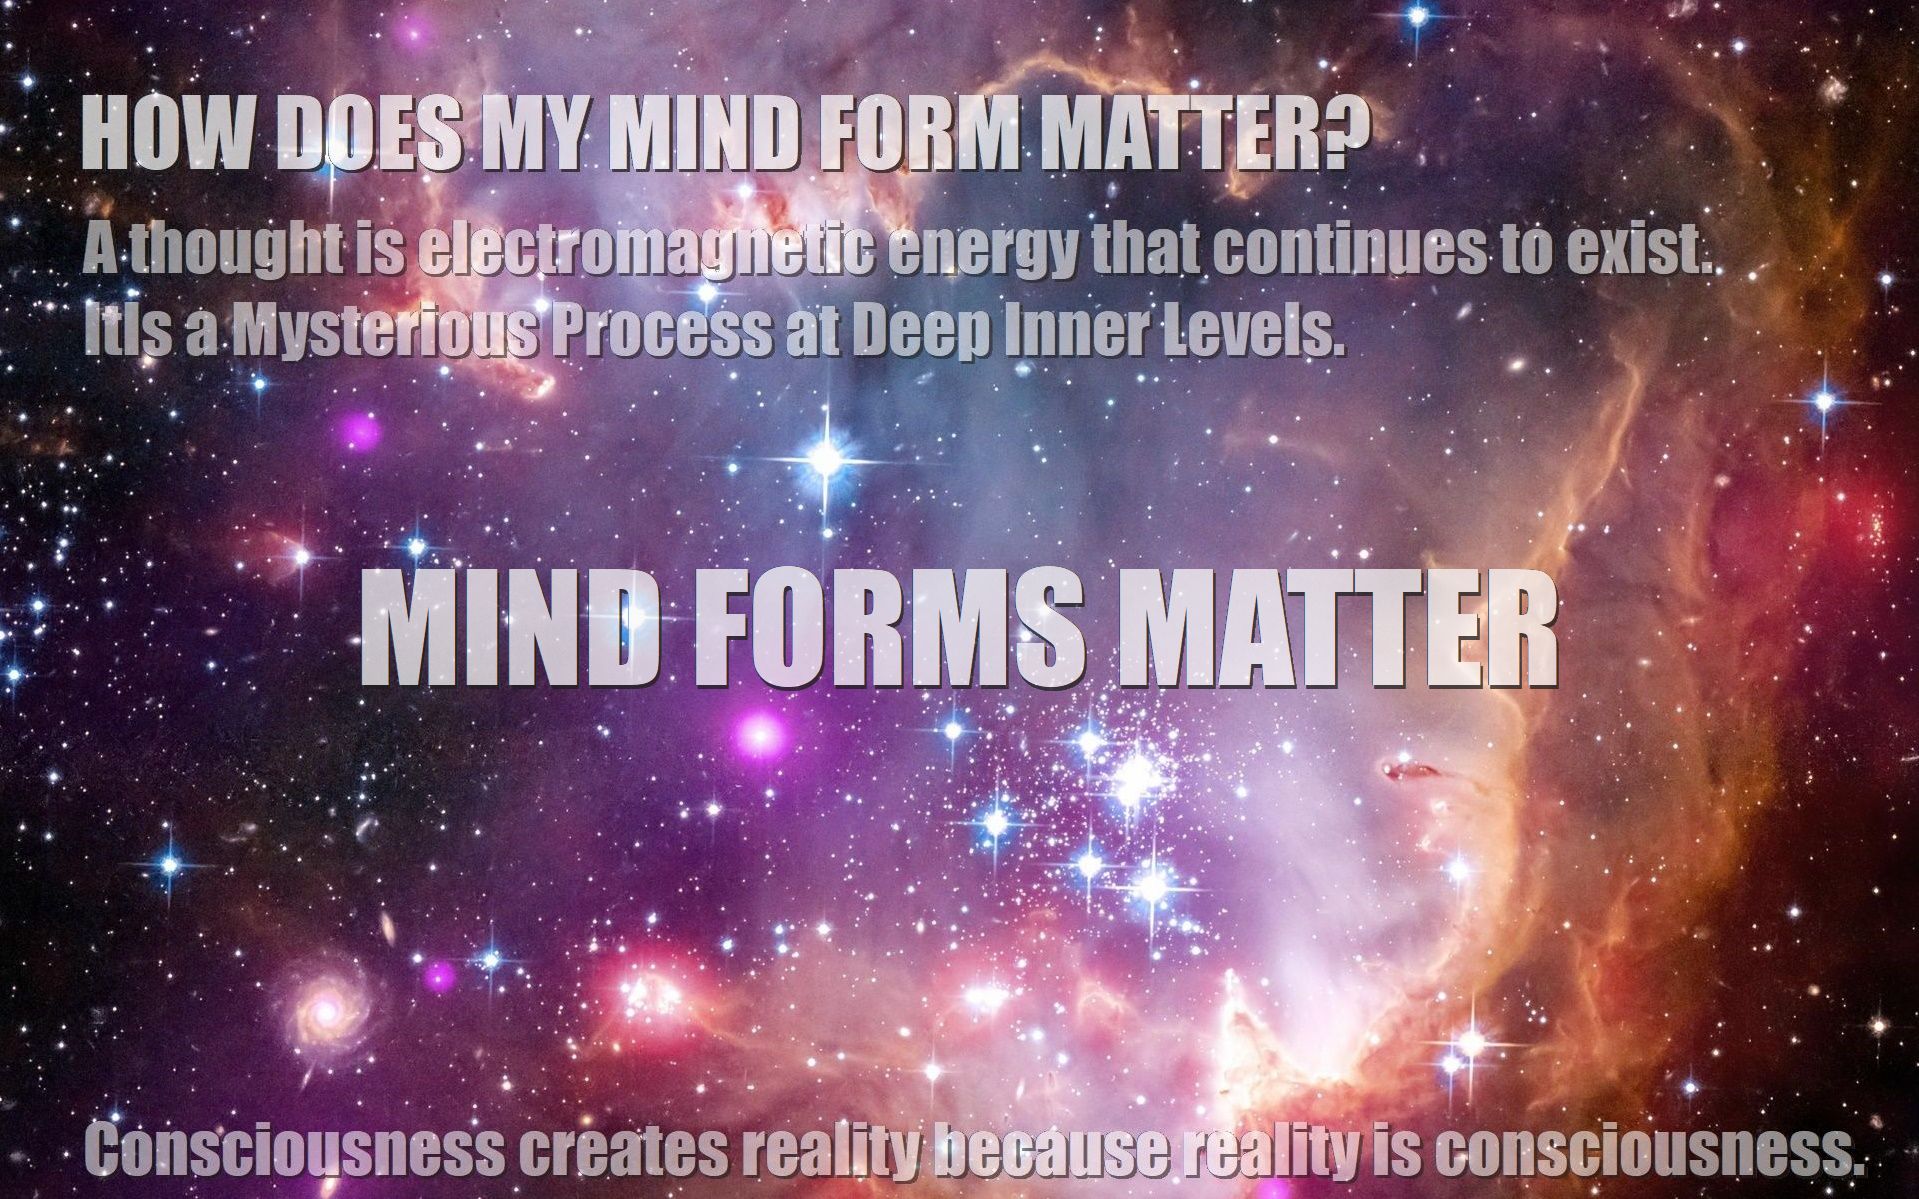 does-consciousness-create-reality-how-do-my-thoughts-create-matter-reality-gx-1919